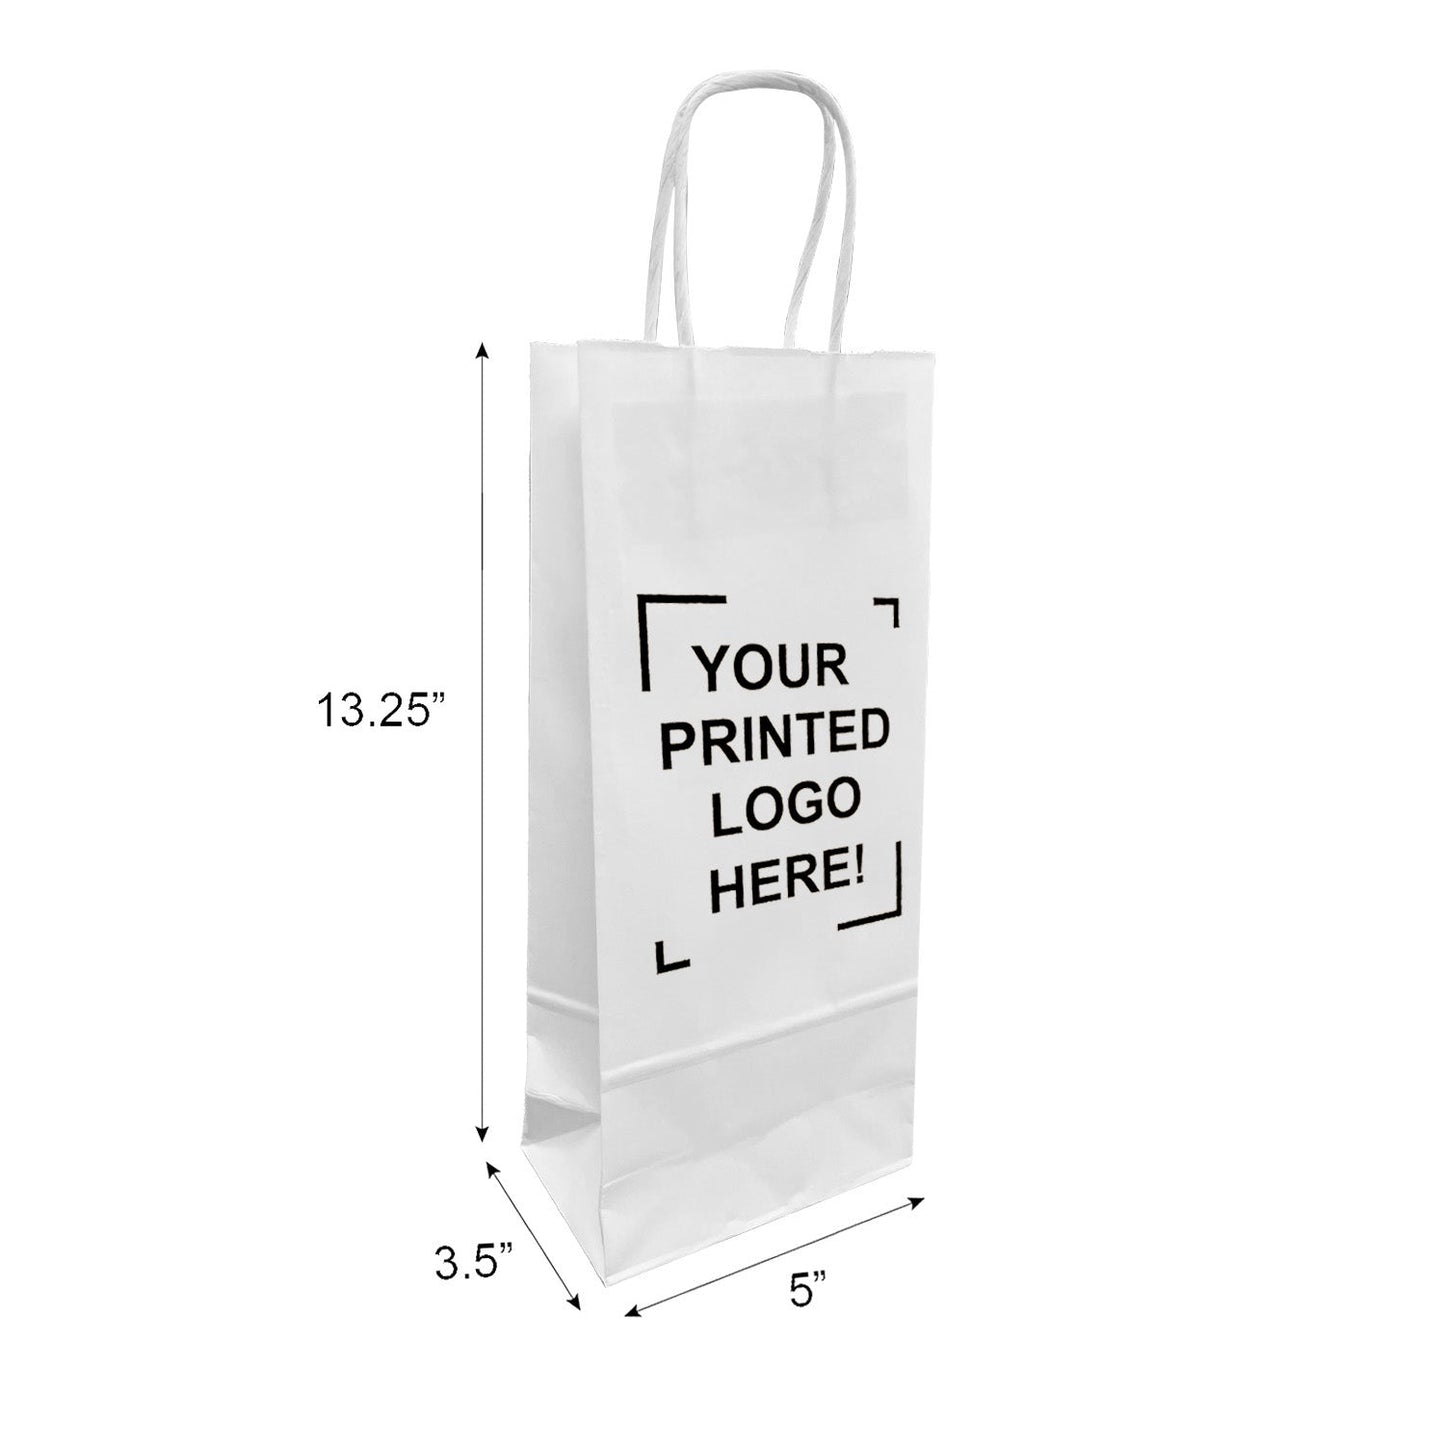 250 Pcs, Wine, 5x3.5x13.25 inches, White Paper Bags, with Twisted Handle, Full Color Custom Print